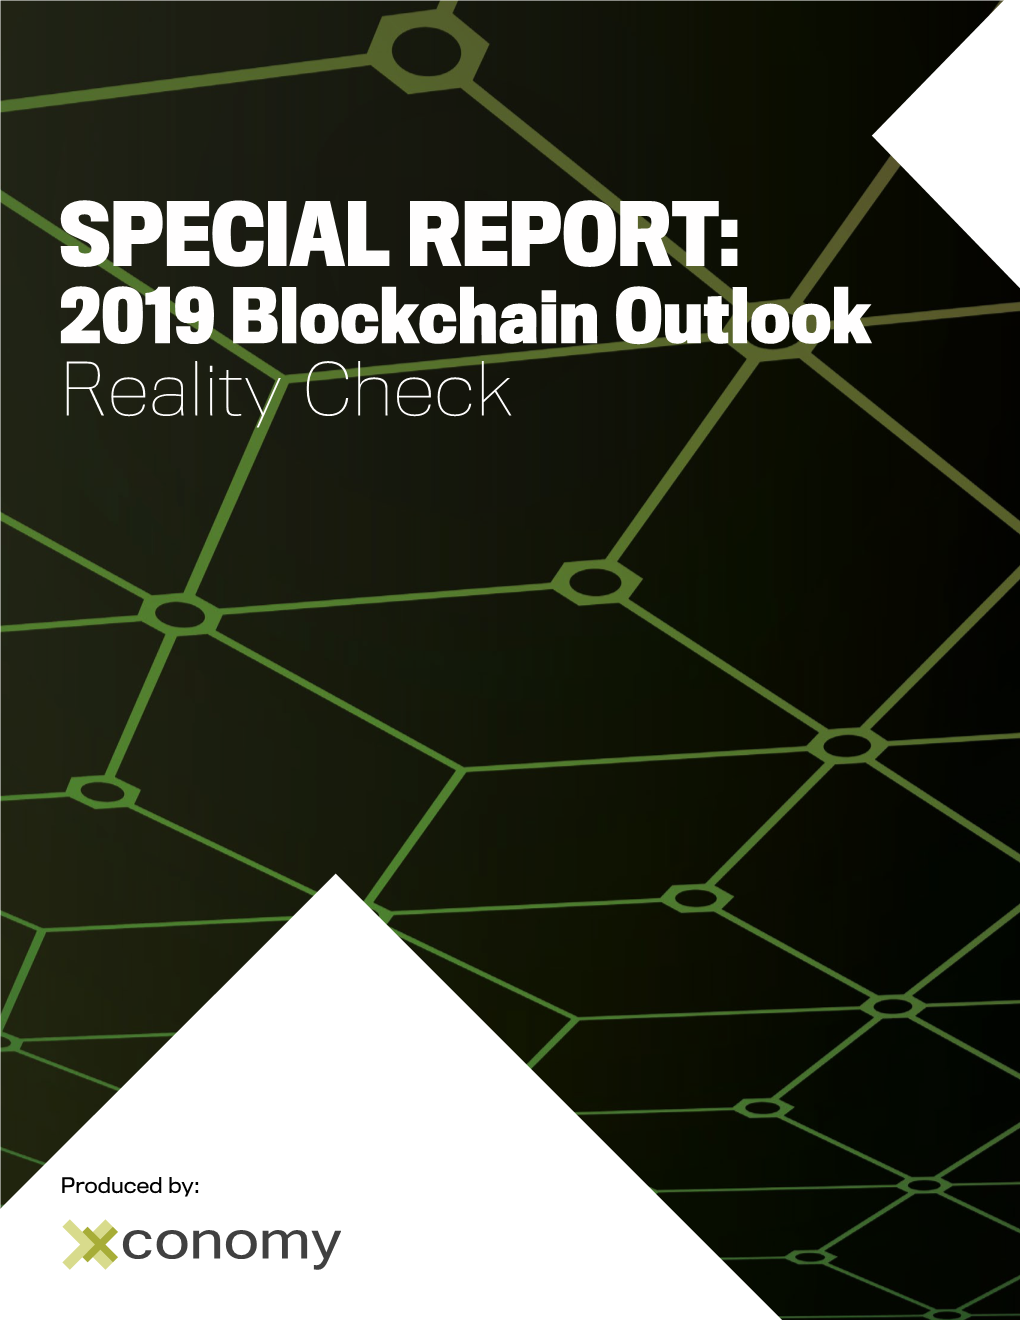 SPECIAL REPORT: 2019 Blockchain Outlook Reality Check